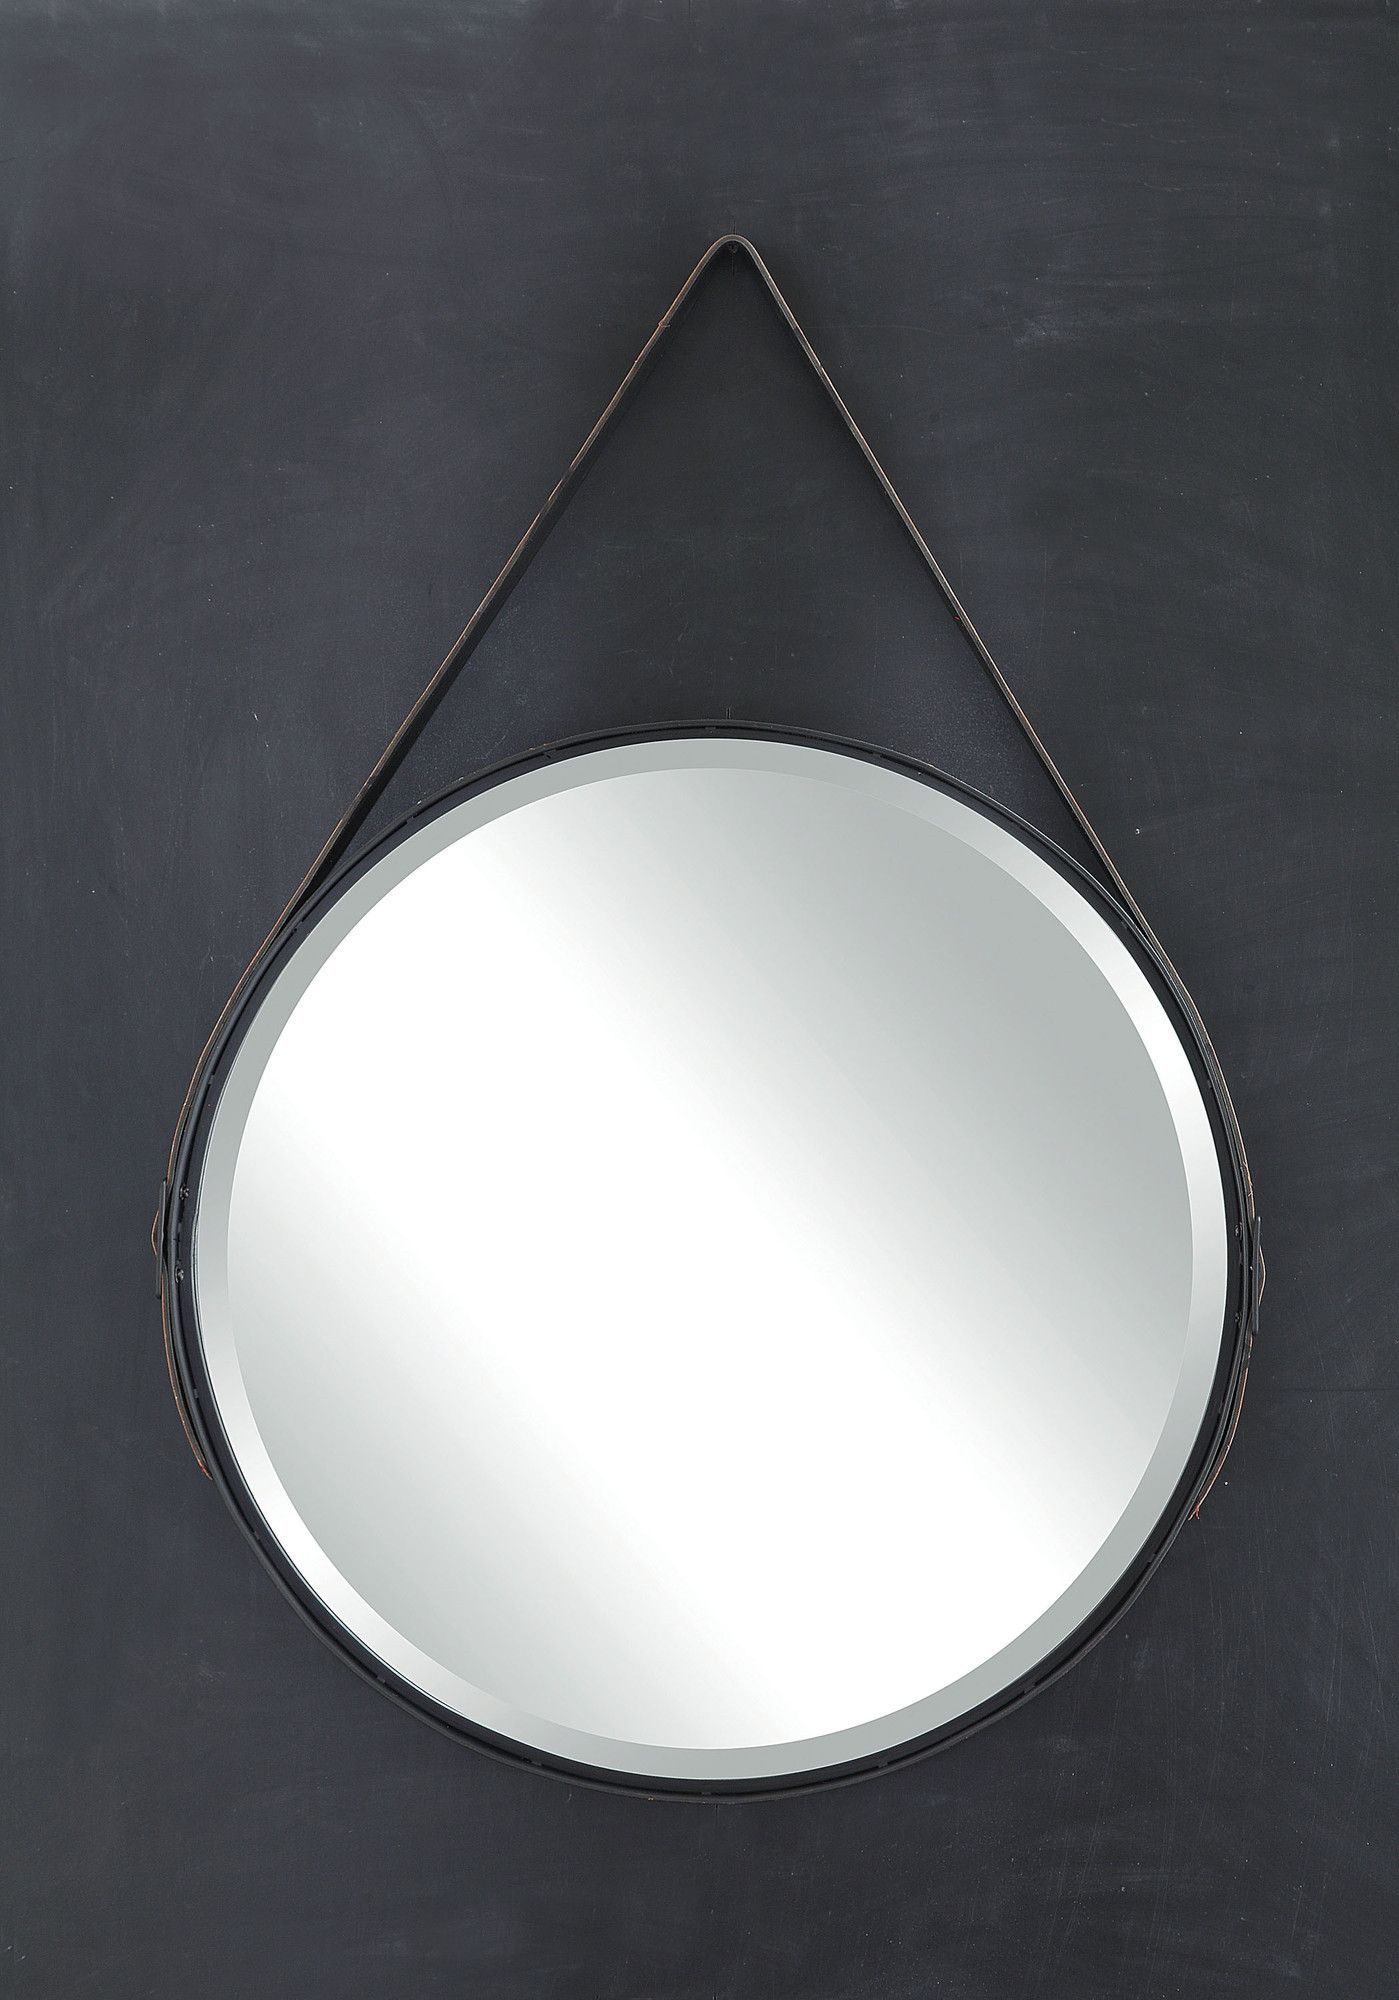 Round Mirror With Leather Strap | Mirrors With Leather Straps, Metal For Black Leather Strap Wall Mirrors (View 14 of 15)